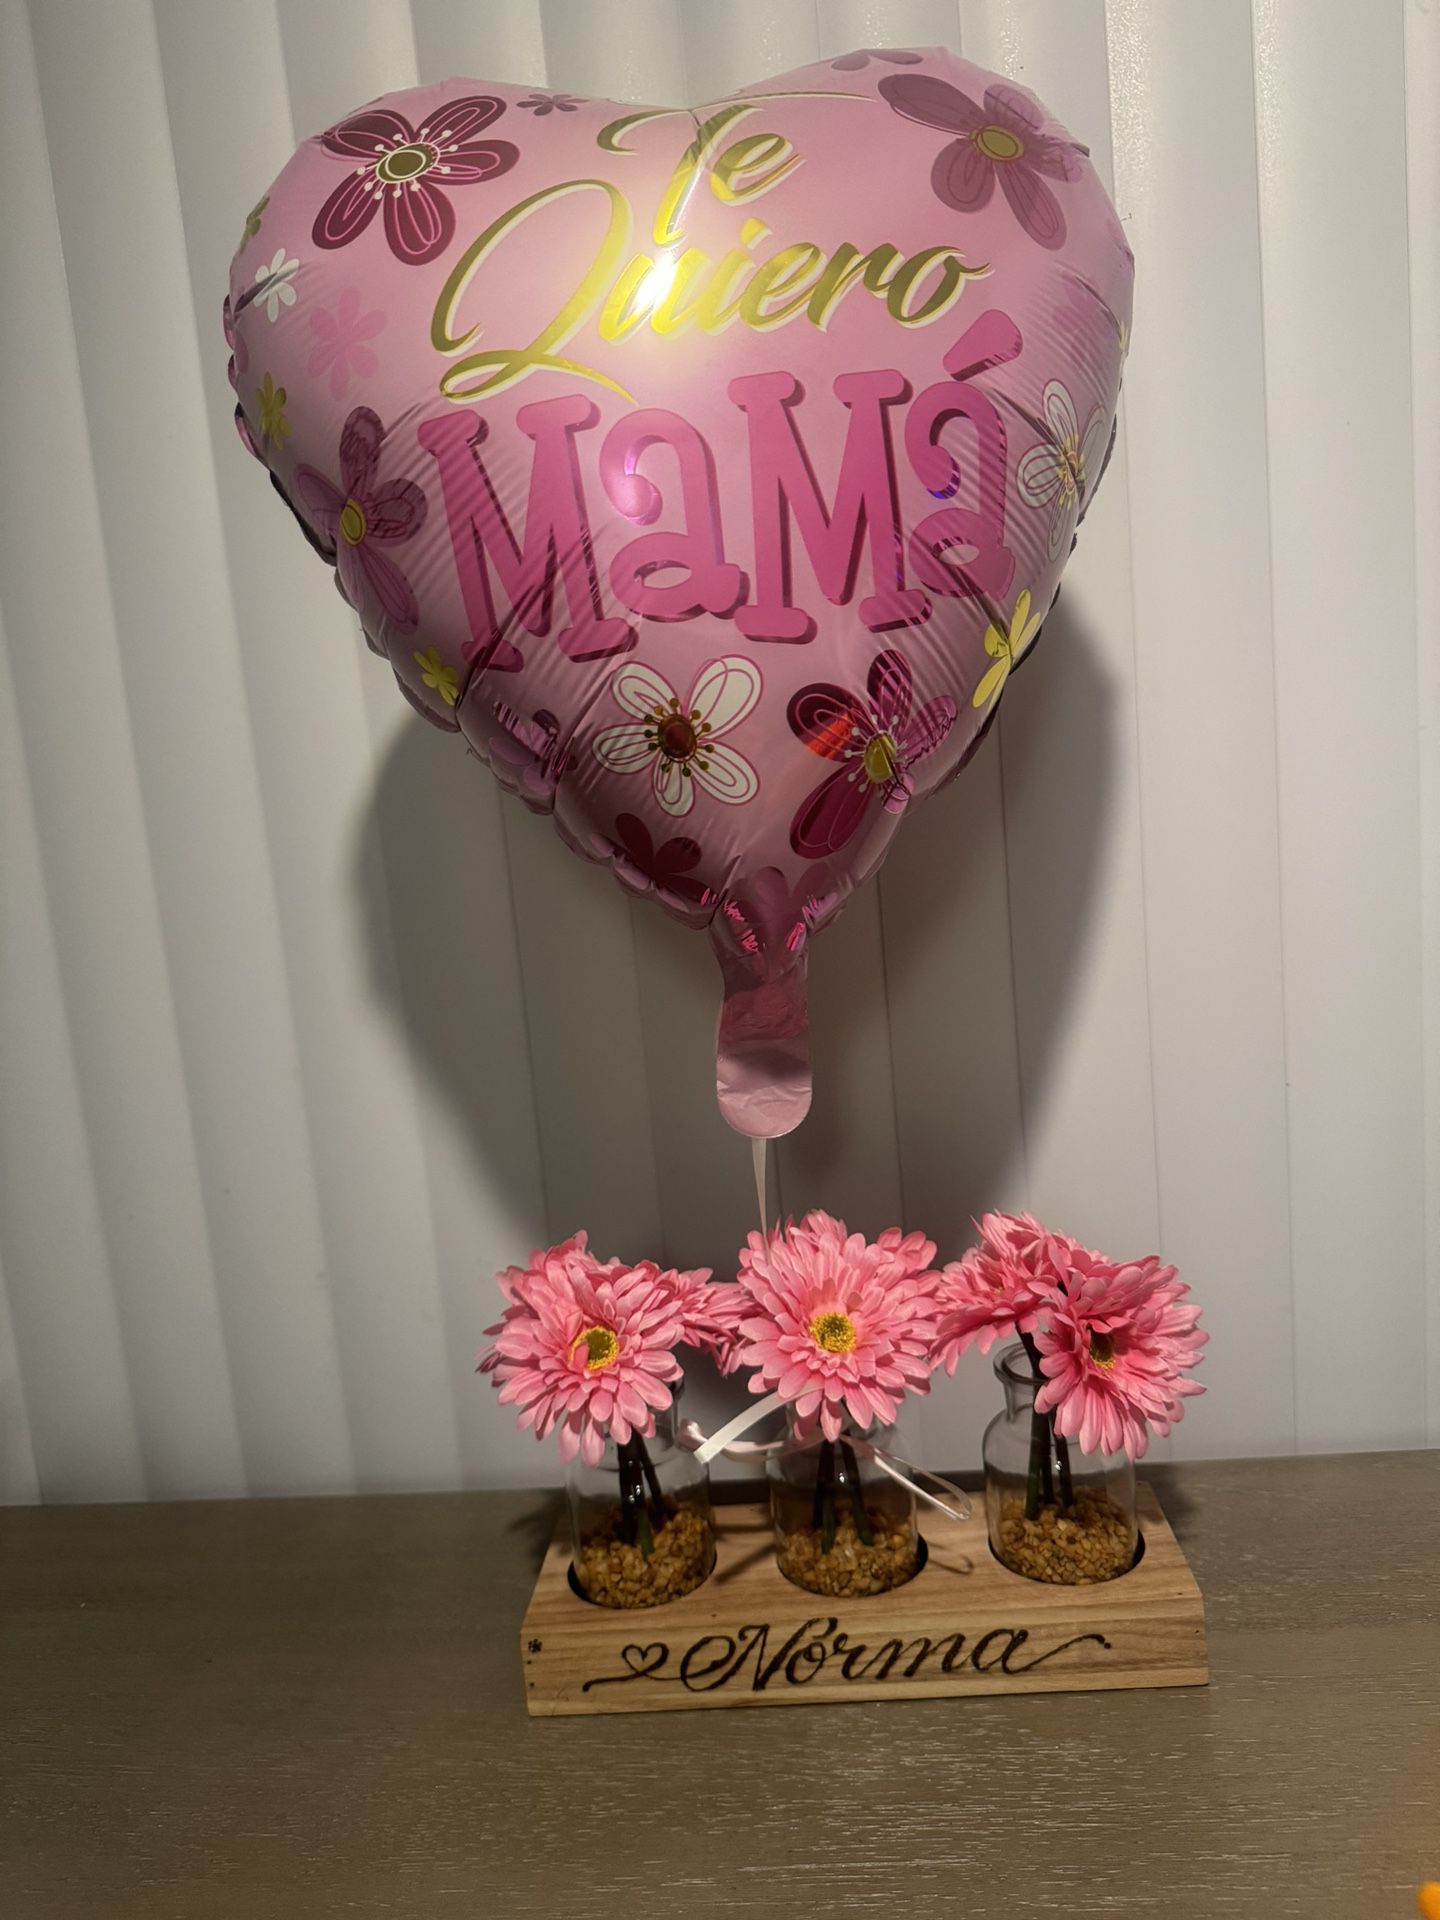 Mothers Day Gift